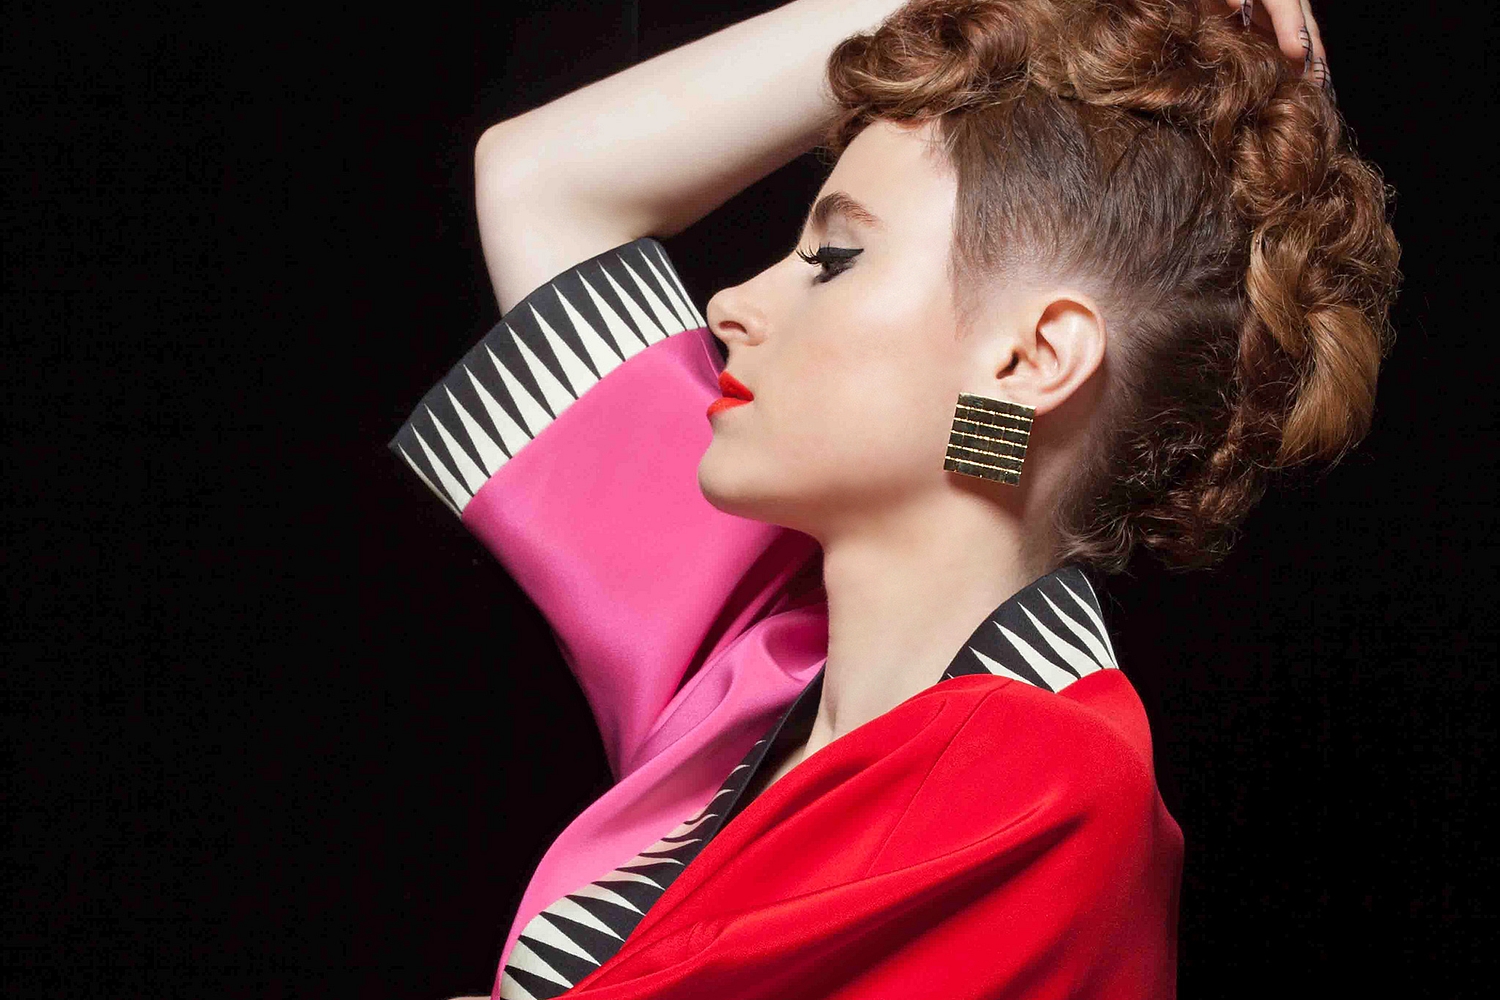 Kiesza: "I had the desire to let the world know who I was"